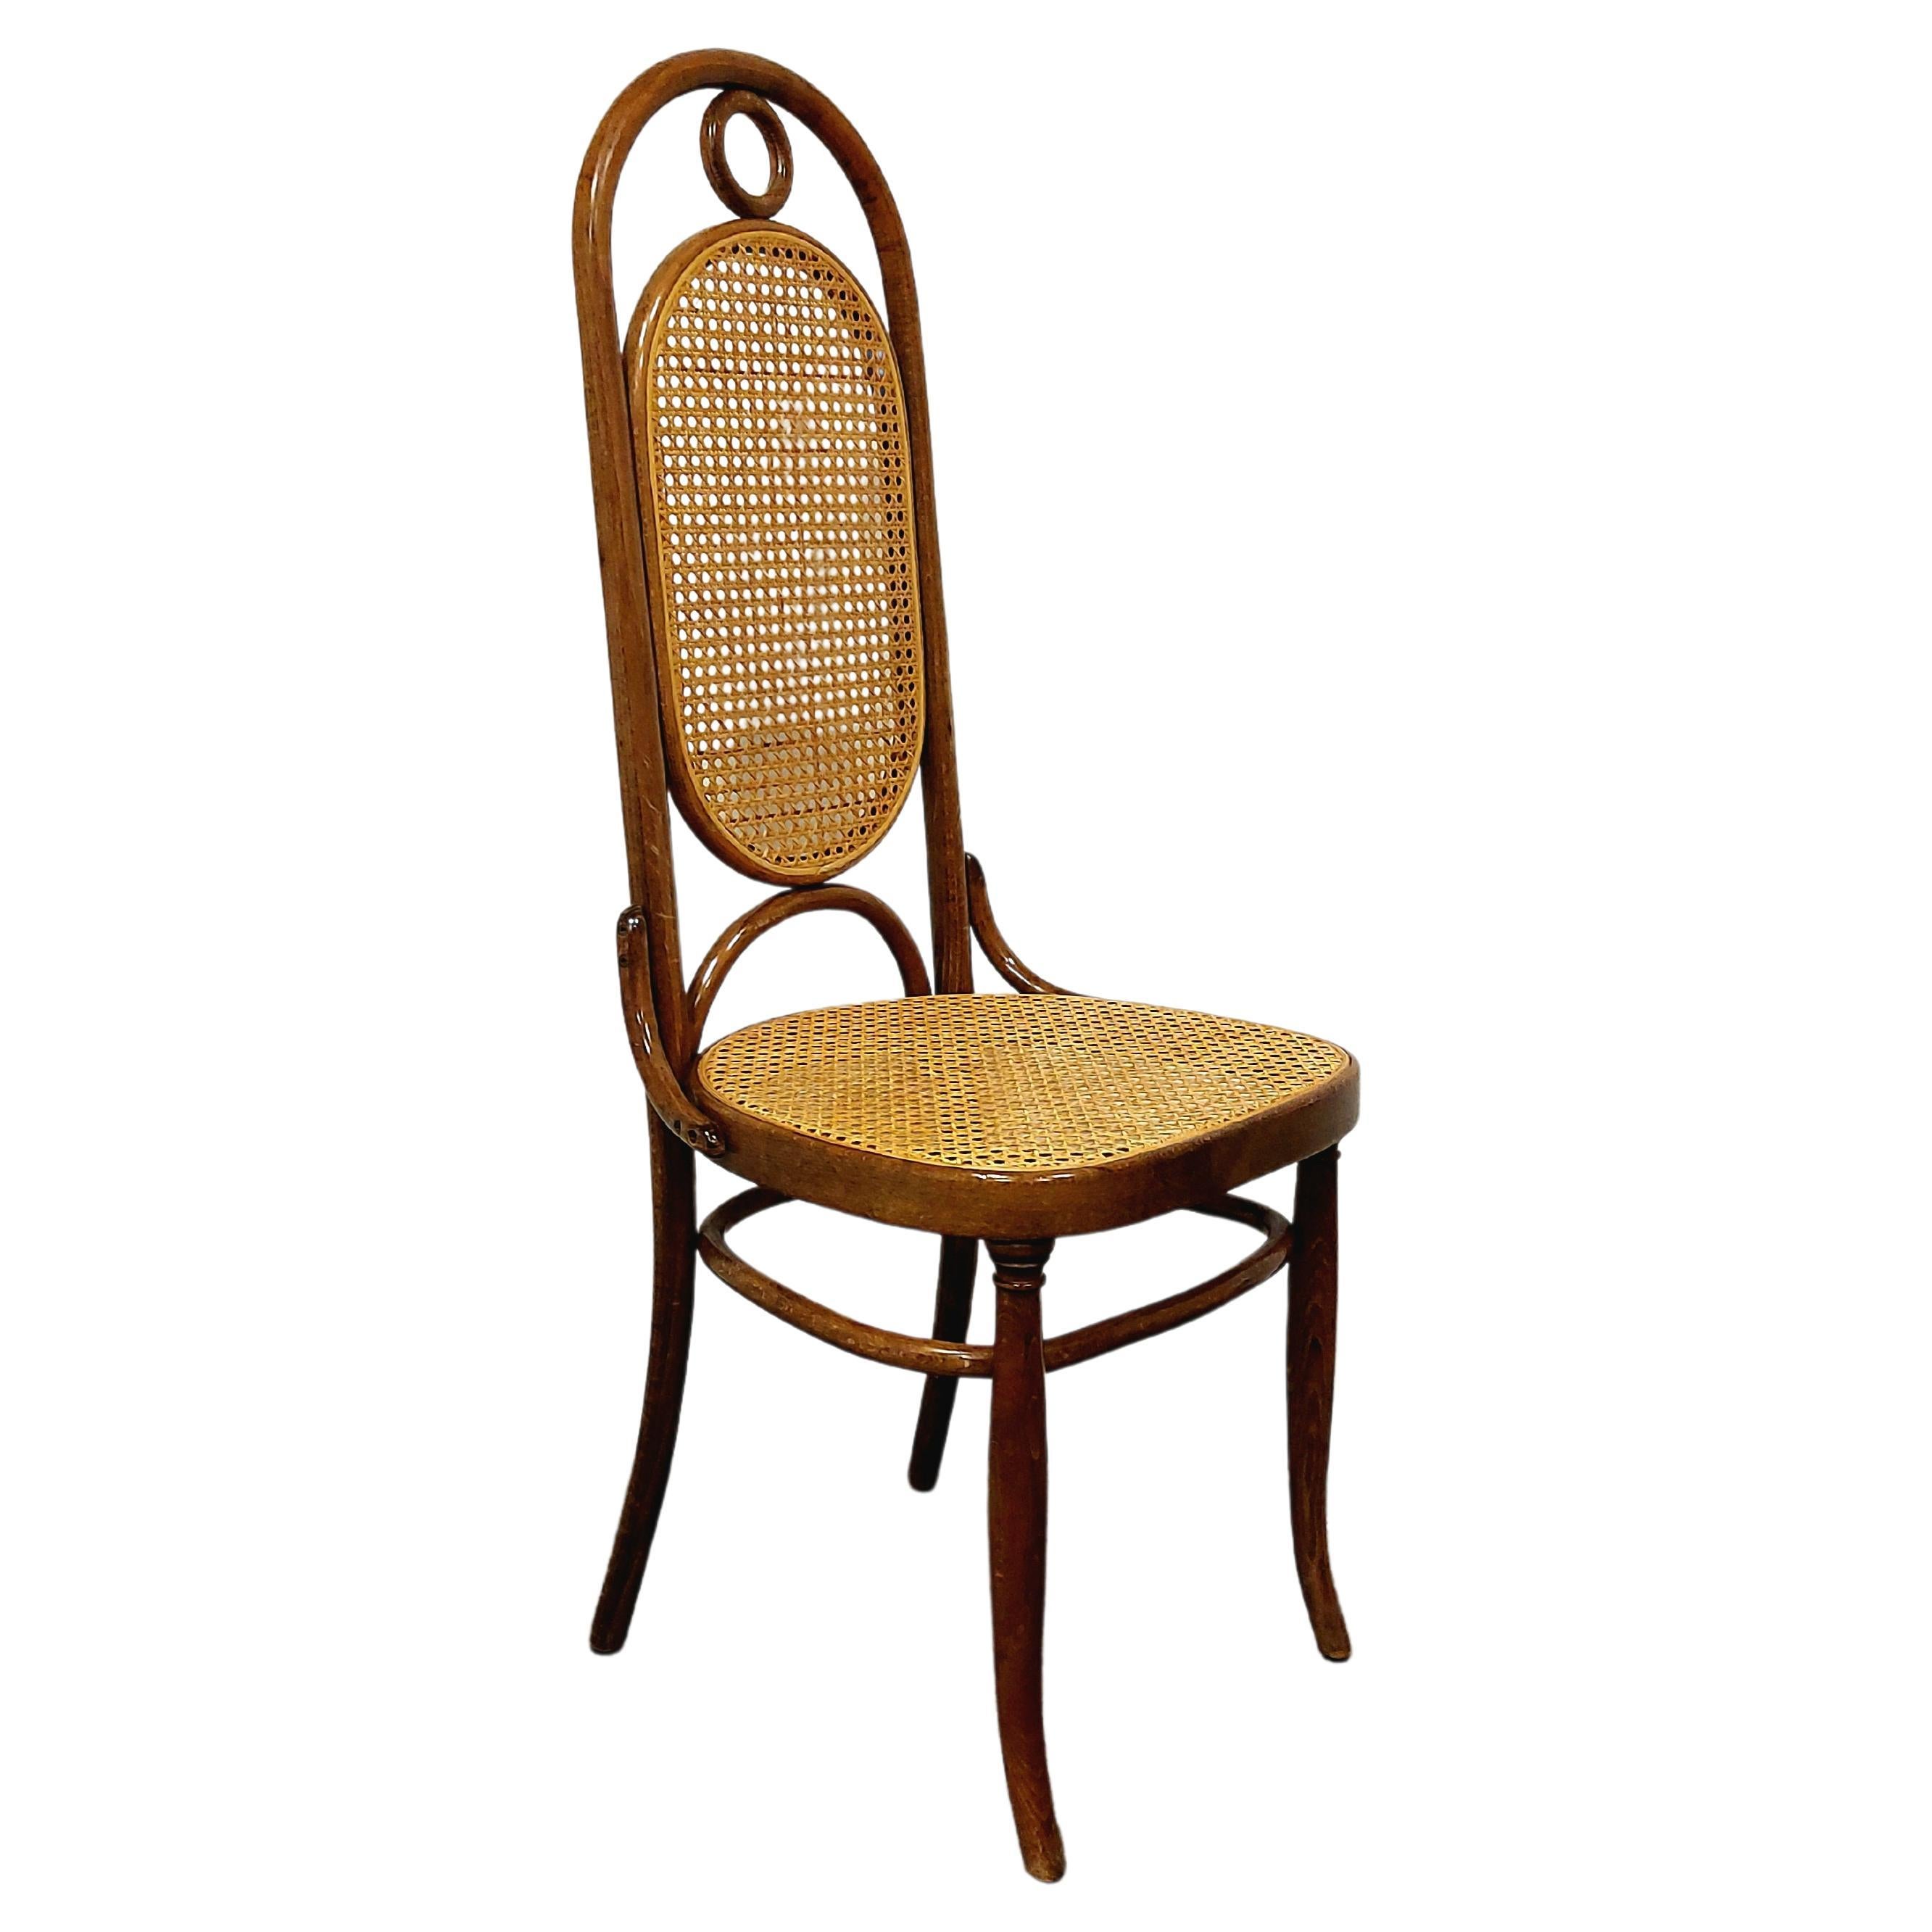 Dining Chairs, Bentwood, M 17, High Back, 1 of 6 For Sale